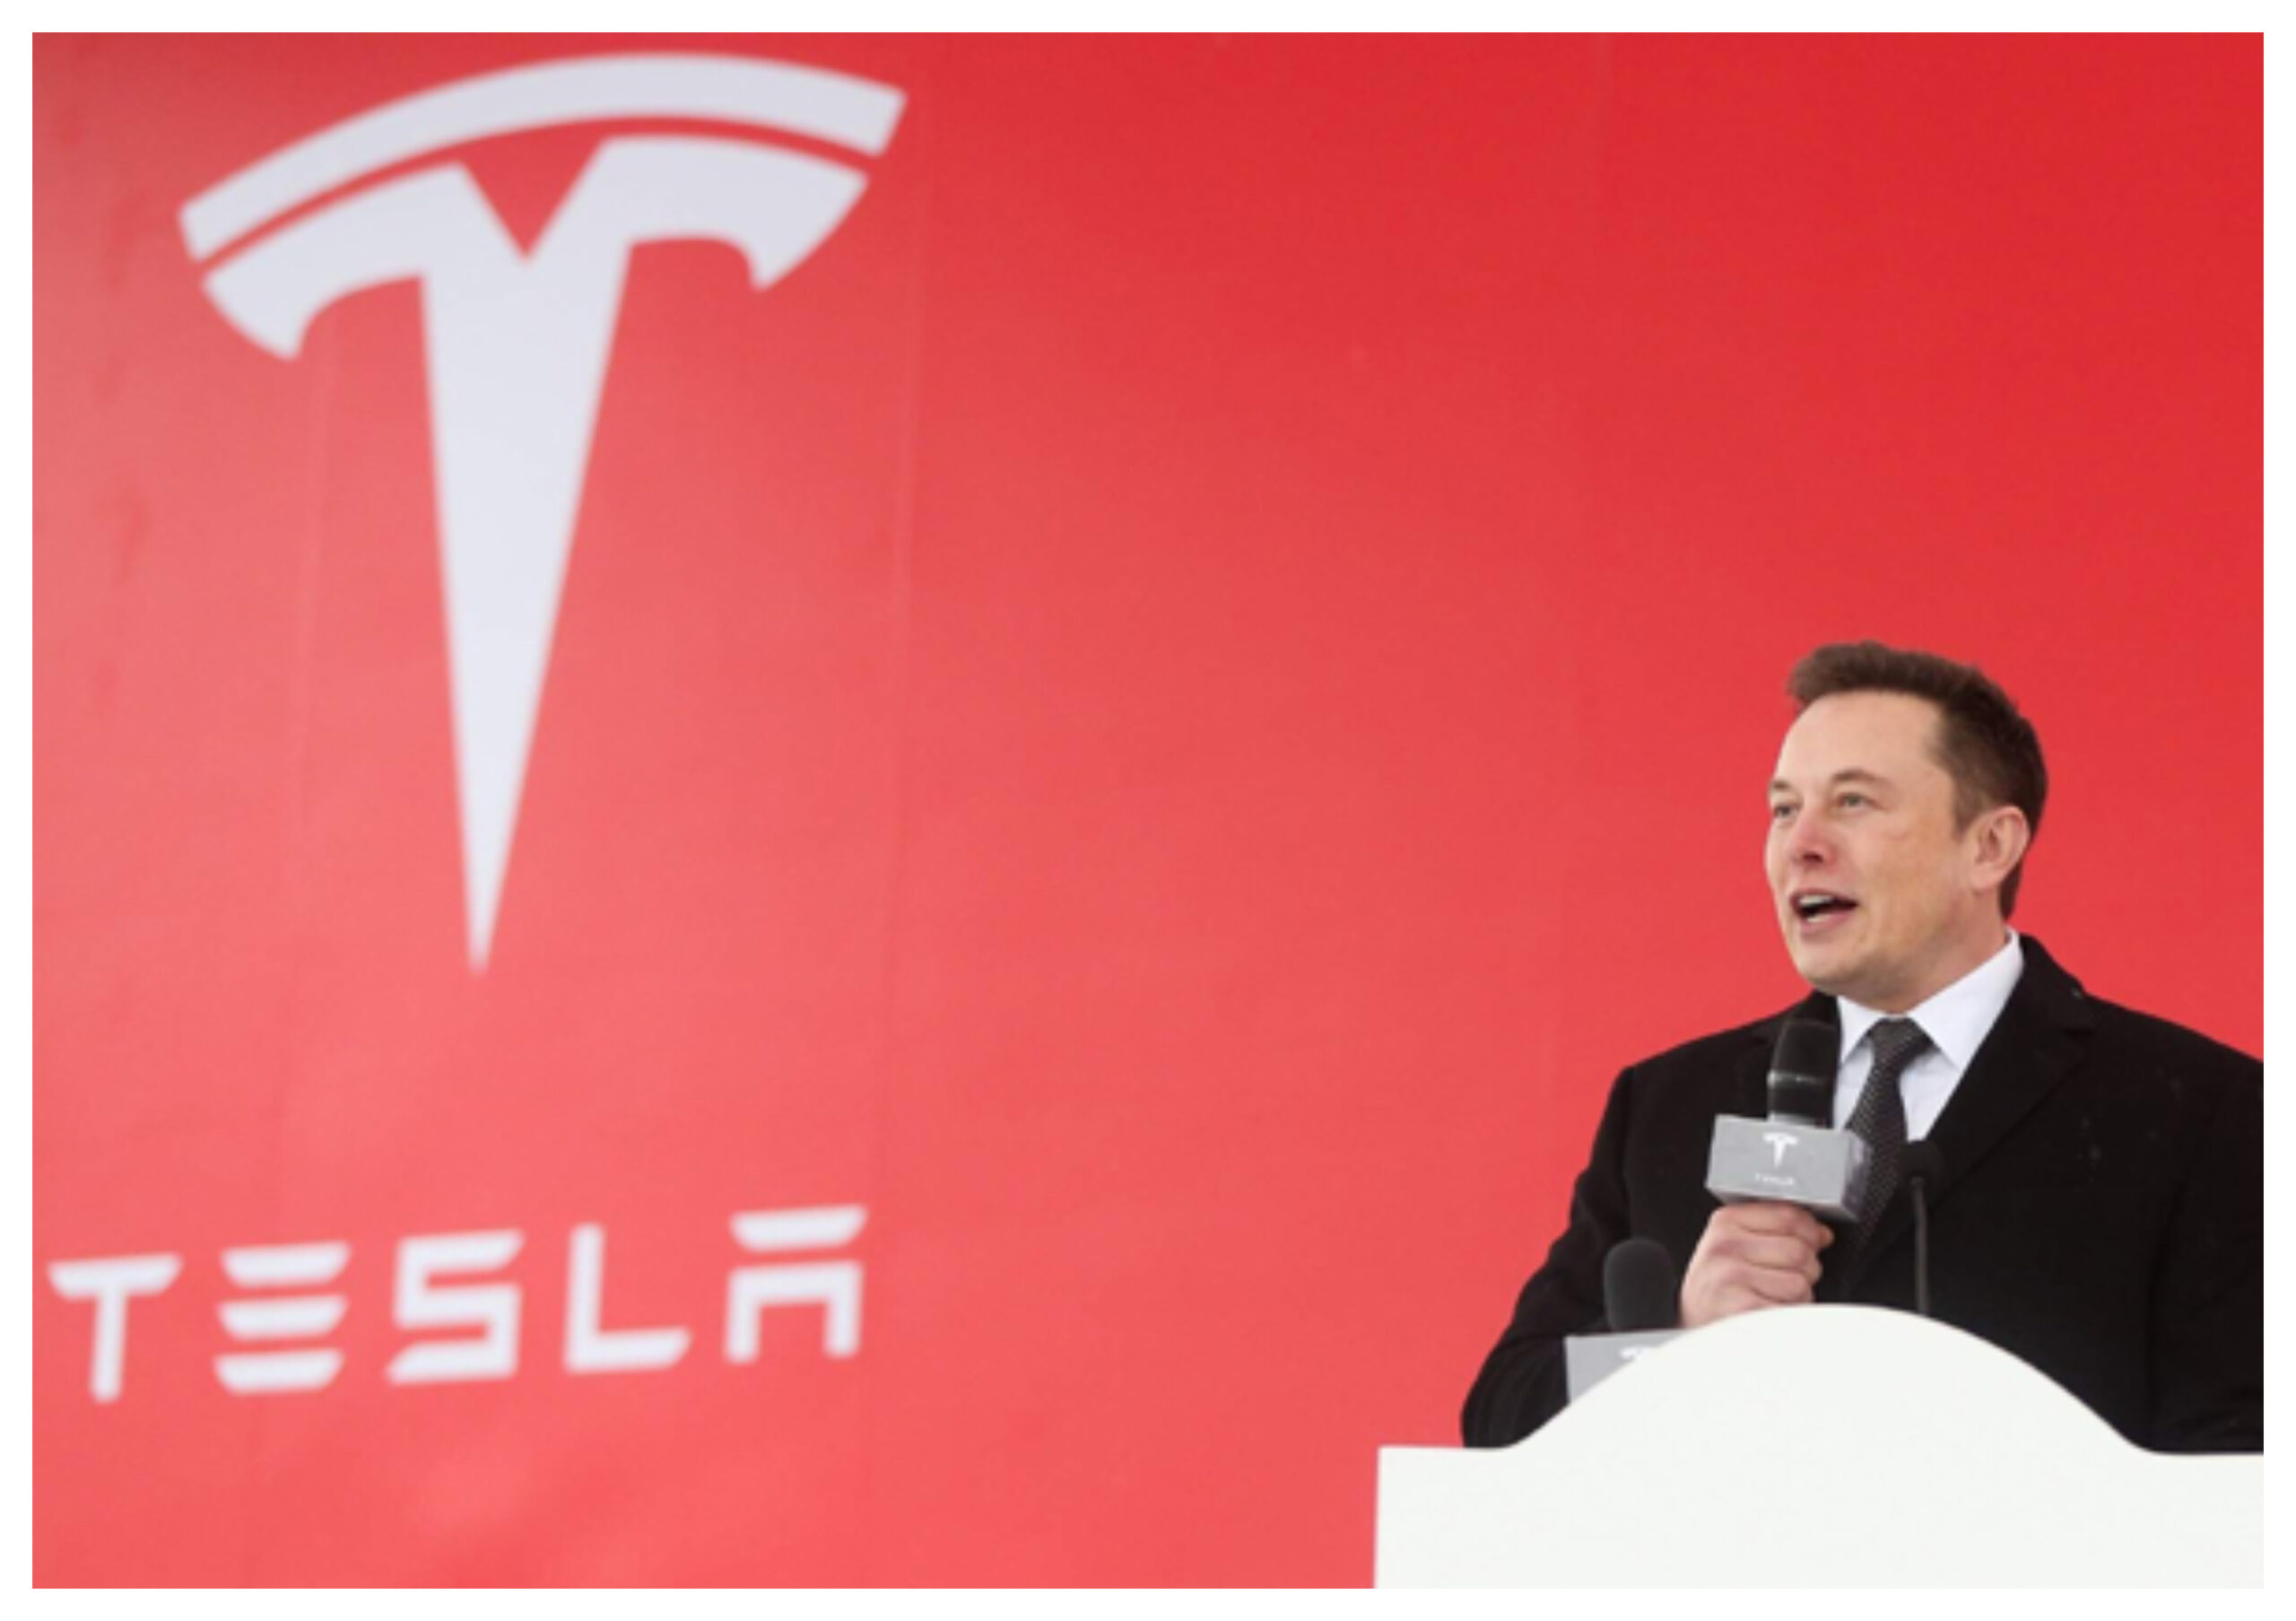 Tesla: Elon Musk will come to India, Tesla's entry may be announced,